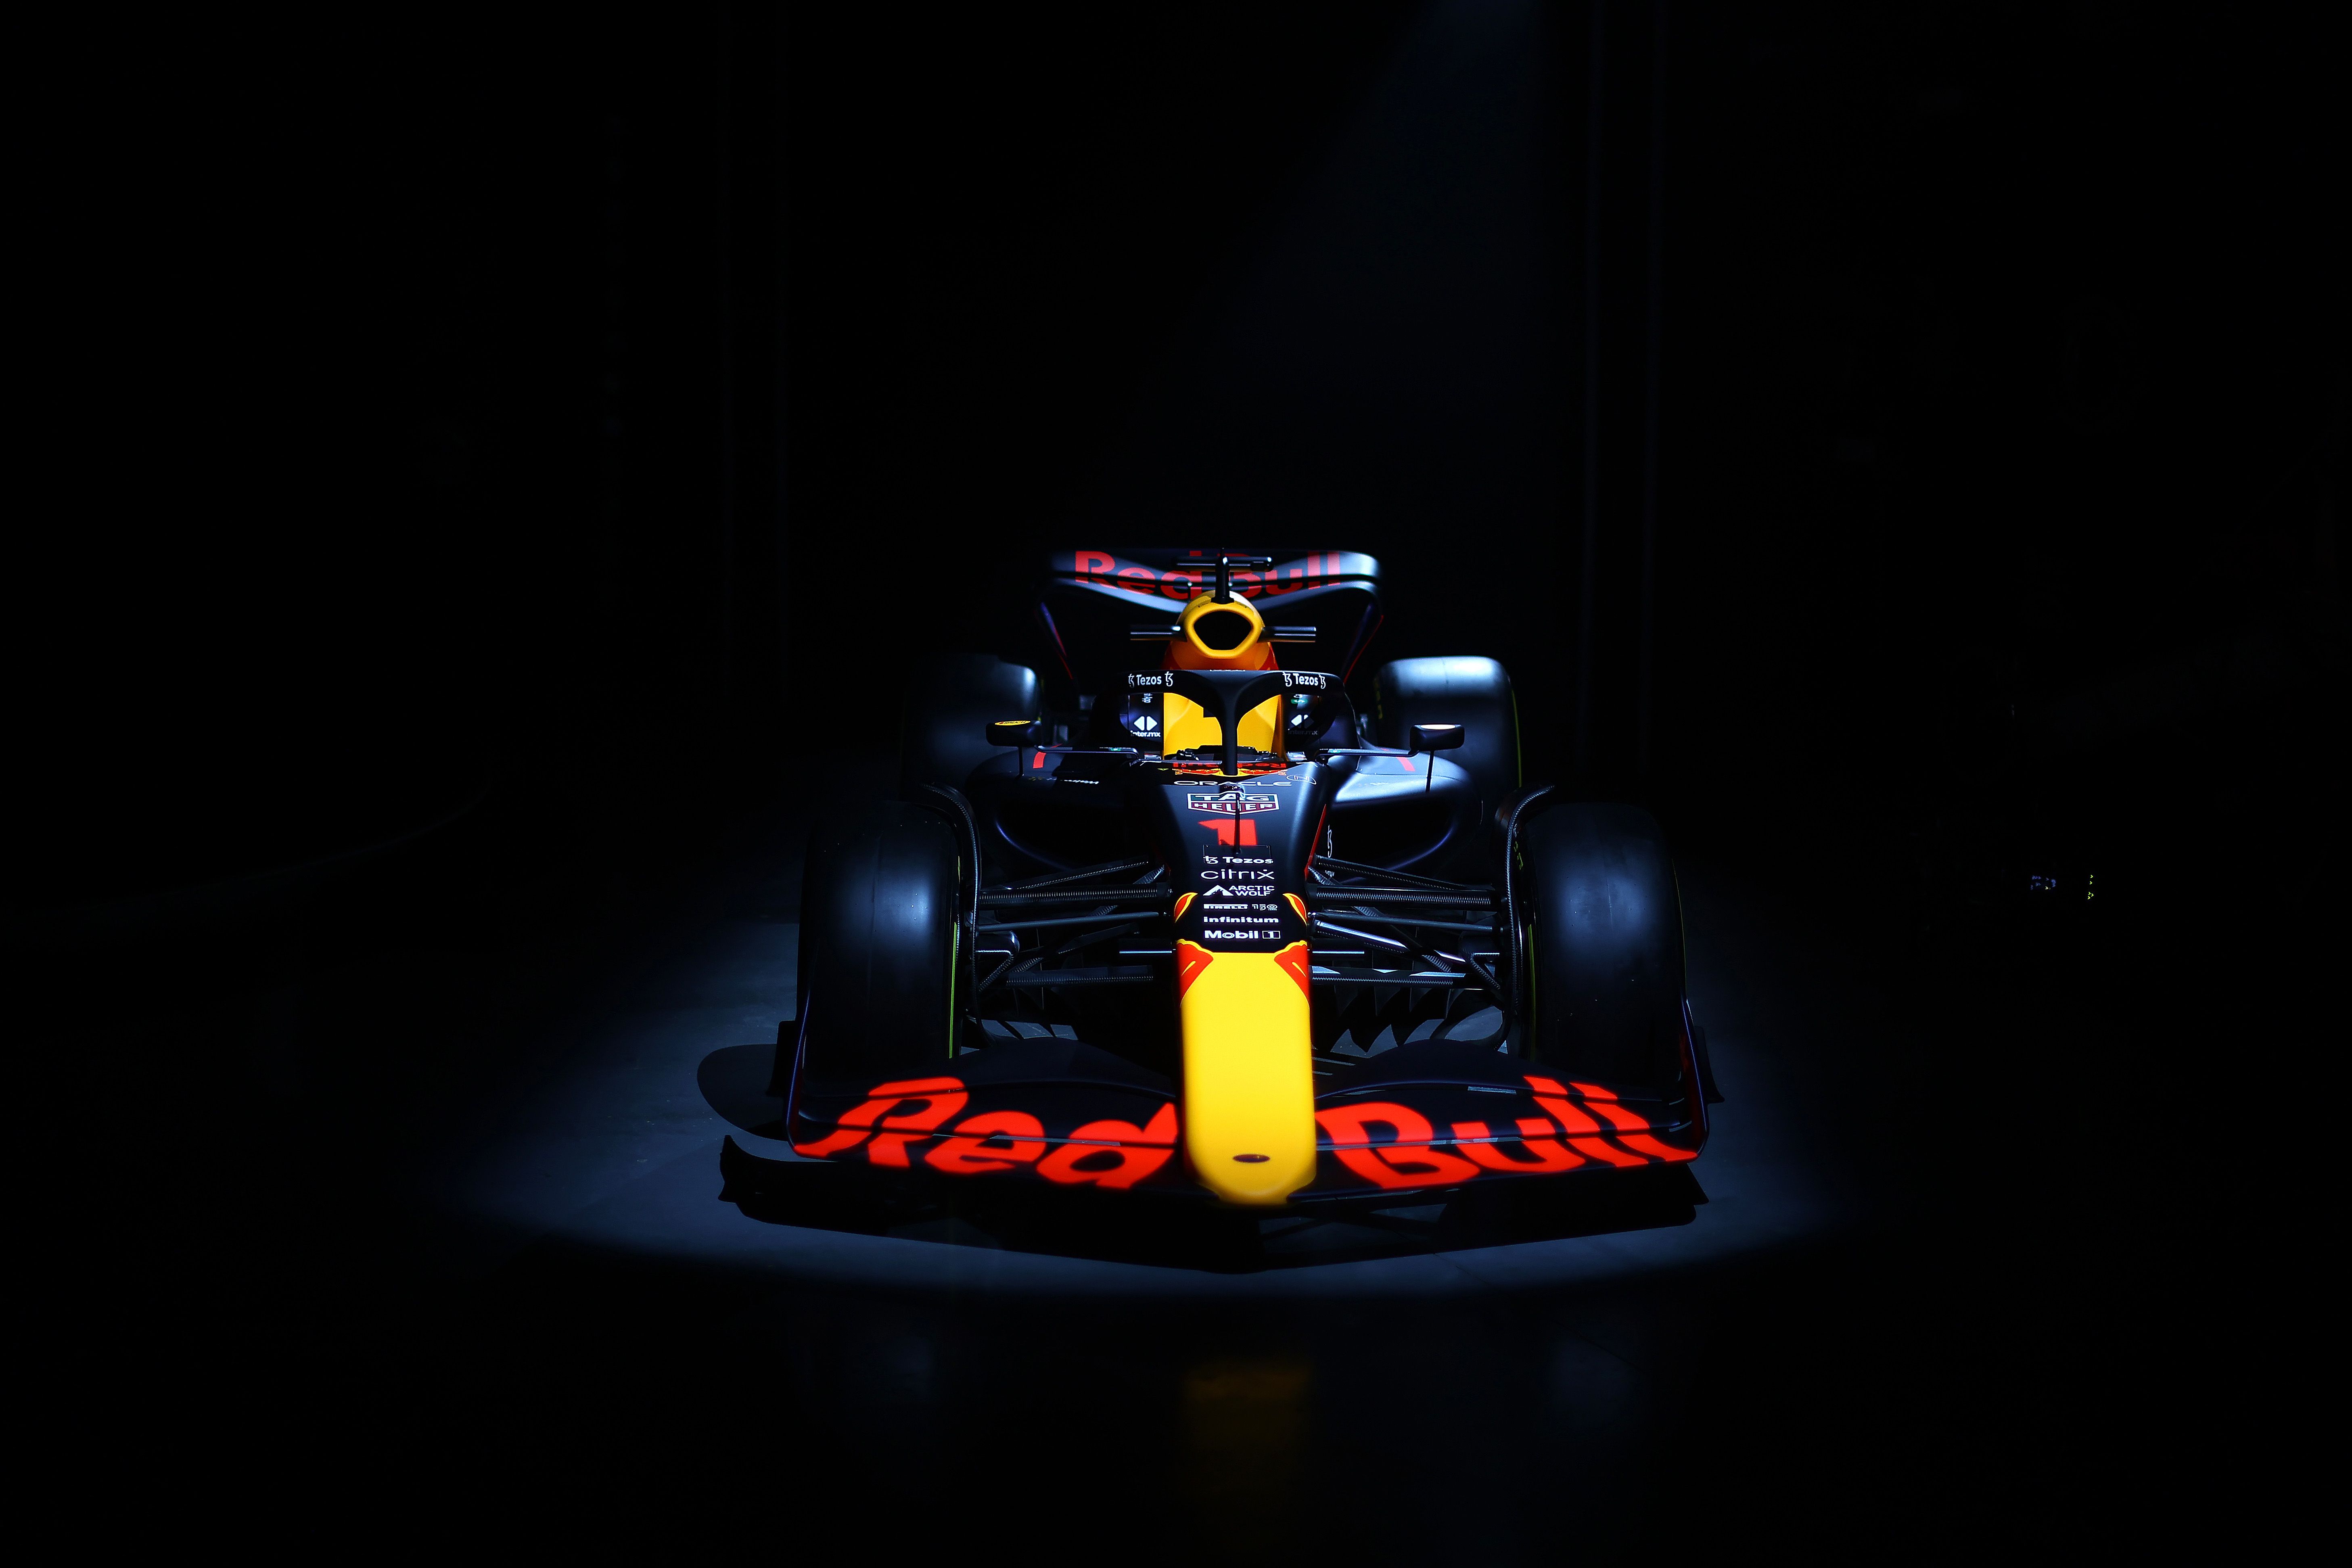 Gallery: Red Bull Launches First Image of RB18 for 2022 Formula 1 Season